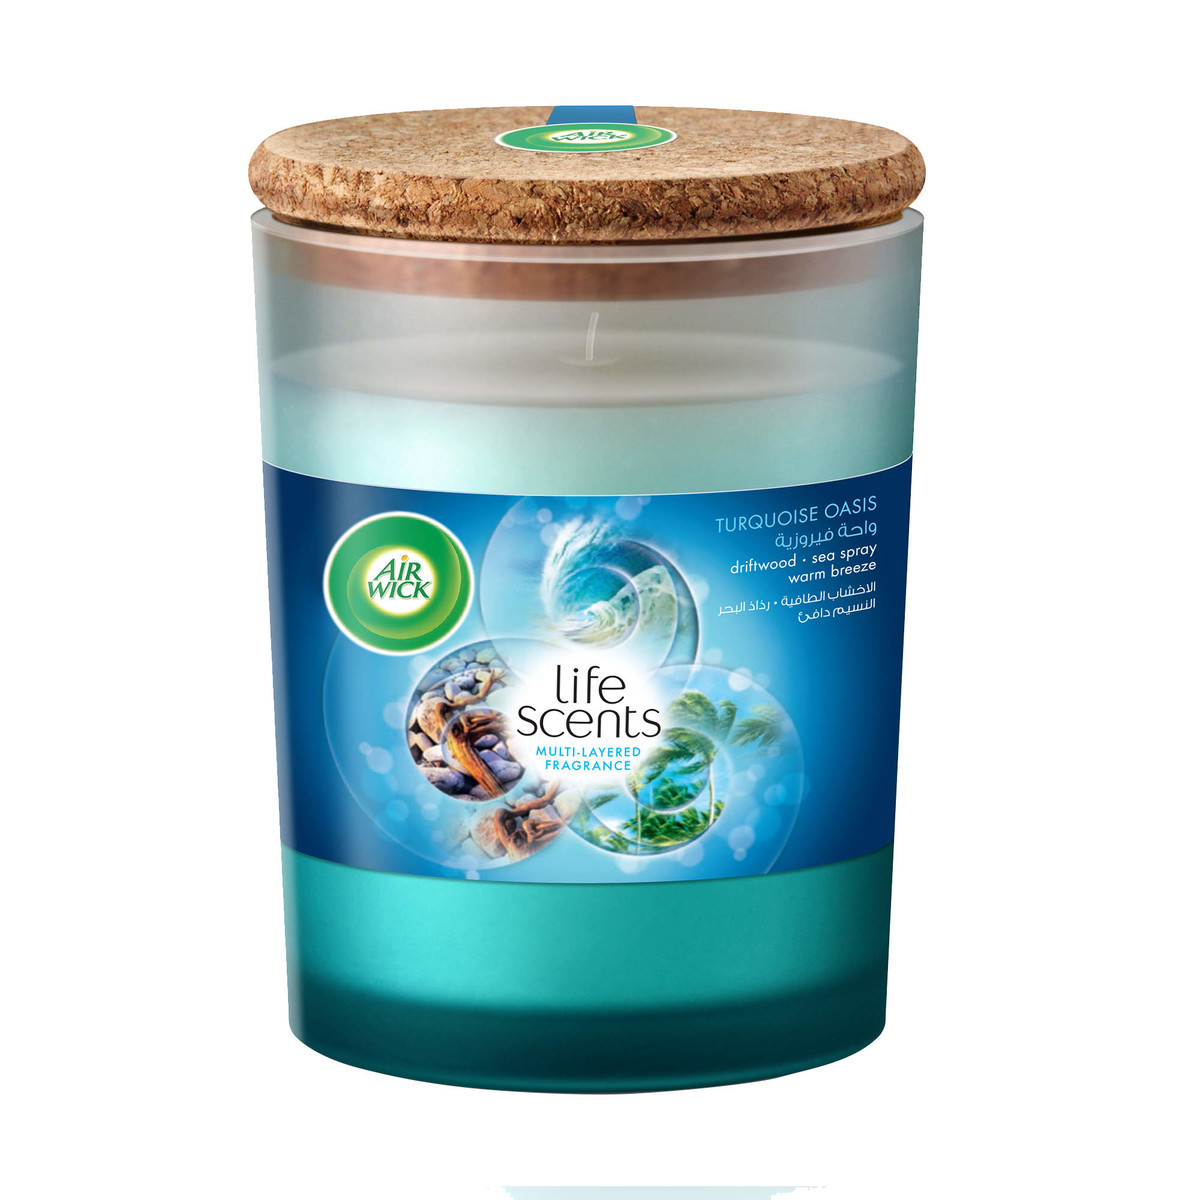 Airwick Air Freshener Candle Turquoise Oasis 185g